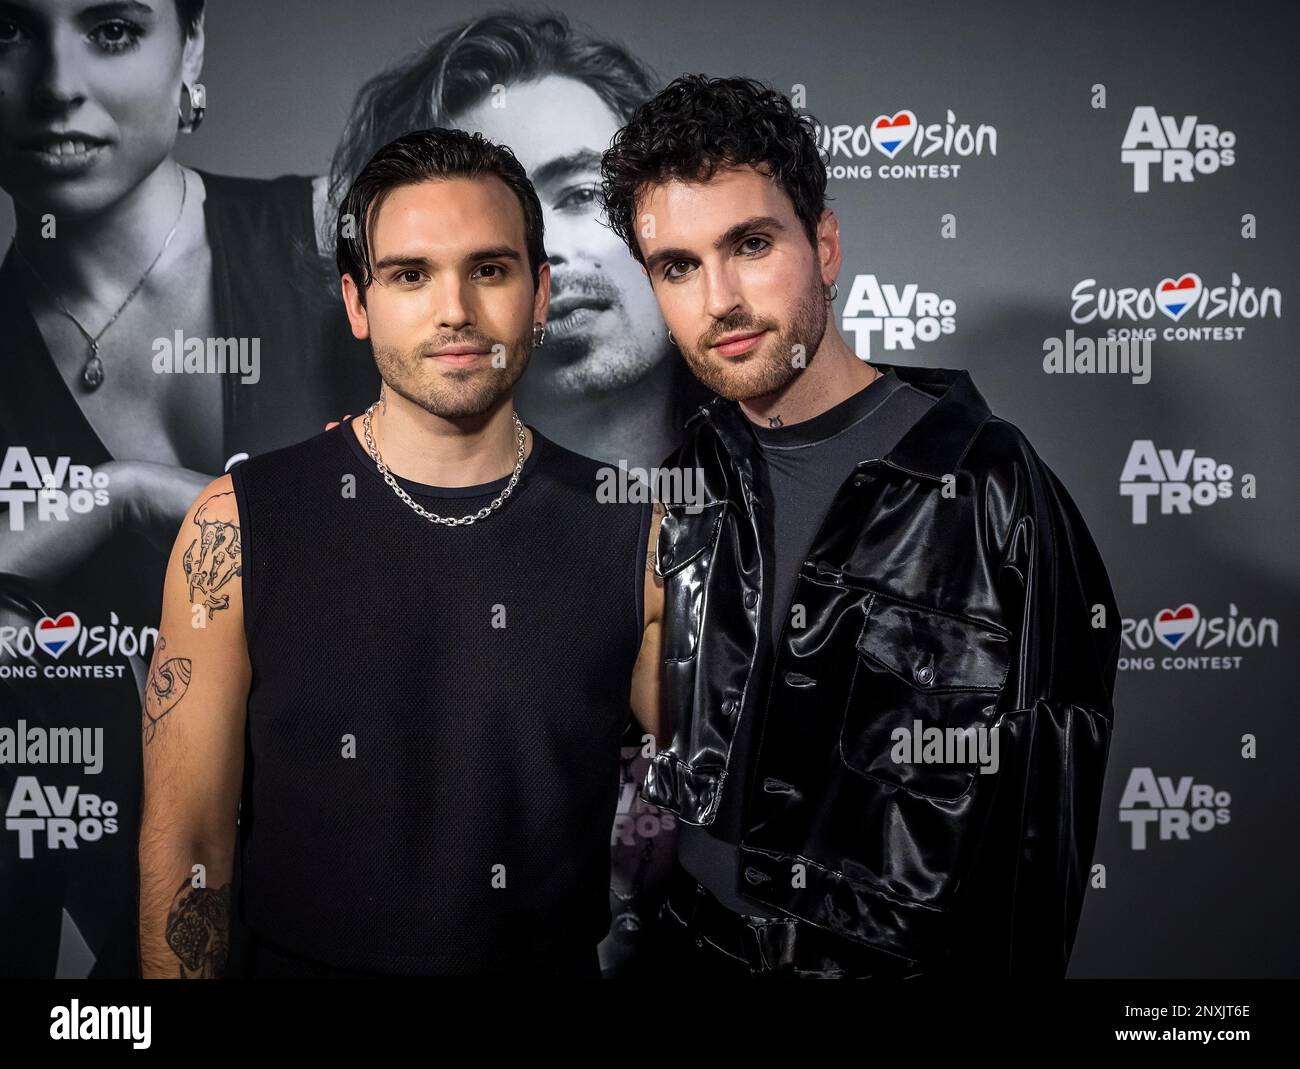 ROTTERDAM - Producers Duncan Laurence and his partner Jordan Garfield  during the presentation of the song by Eurovision duo Mia & Dion for the  Eurovision Song Contest in Liverpool. ANP REMKO DE